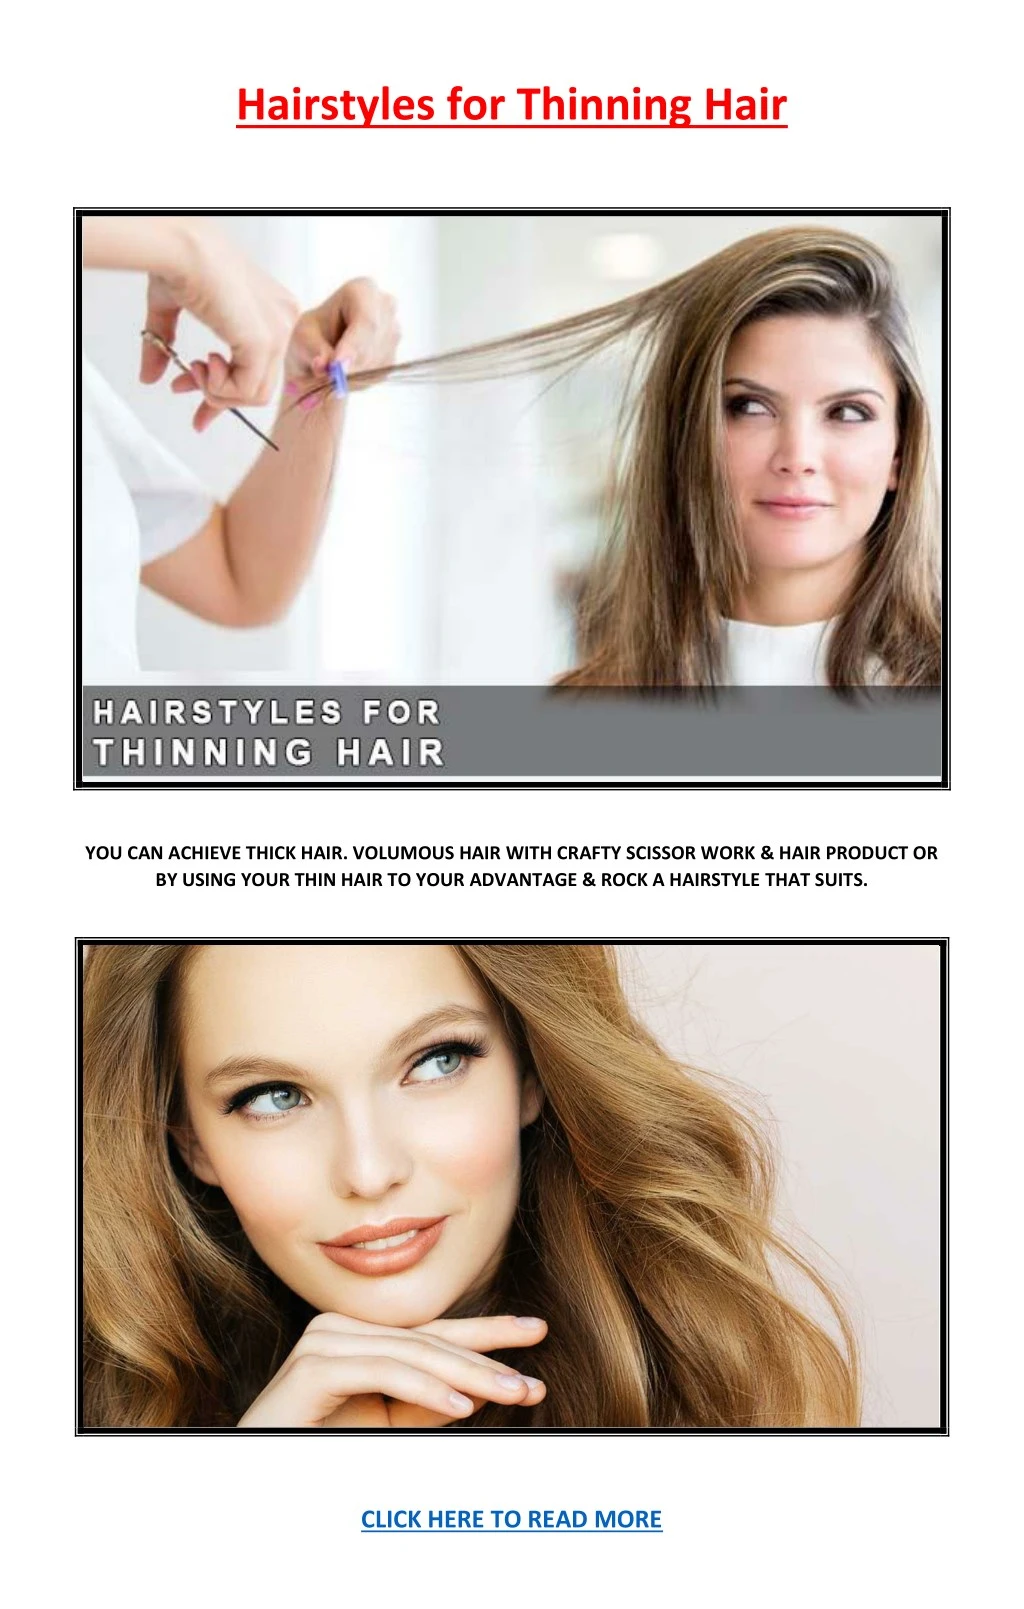 hairstyles for thinning hair n.